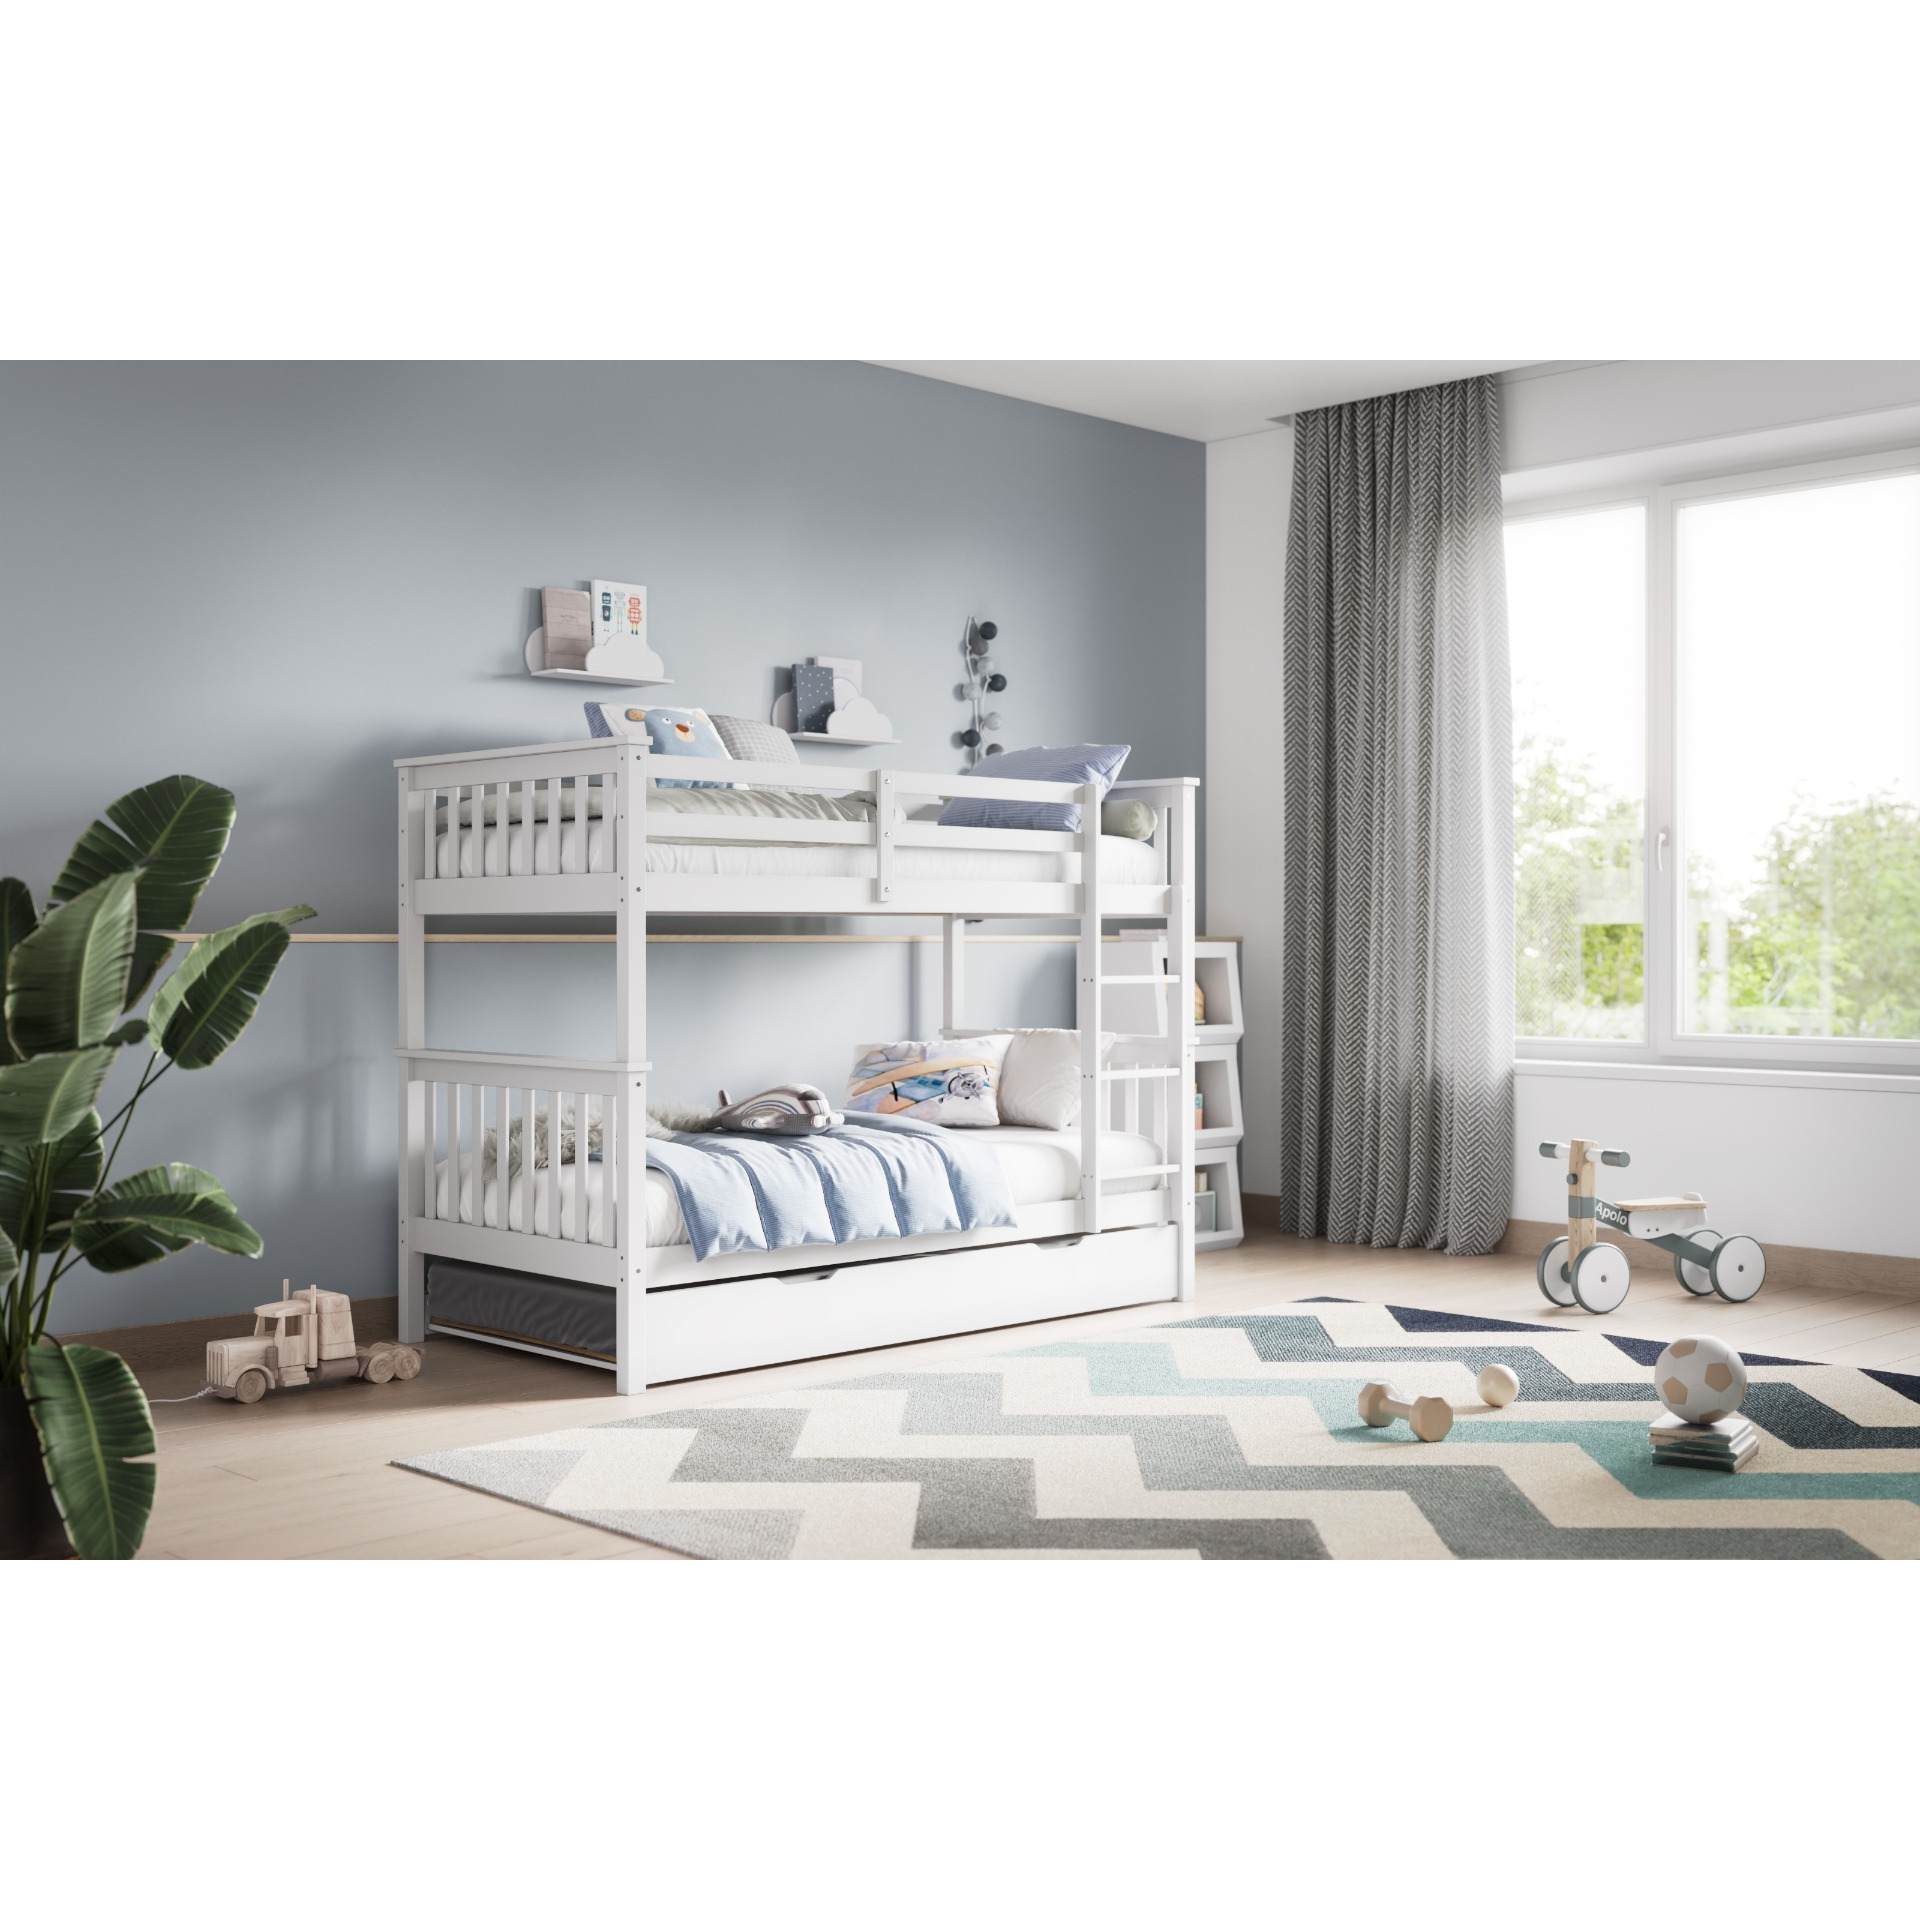 Flair Wooden Zoom Detachable Bunk Bed With Trundle White - image 1